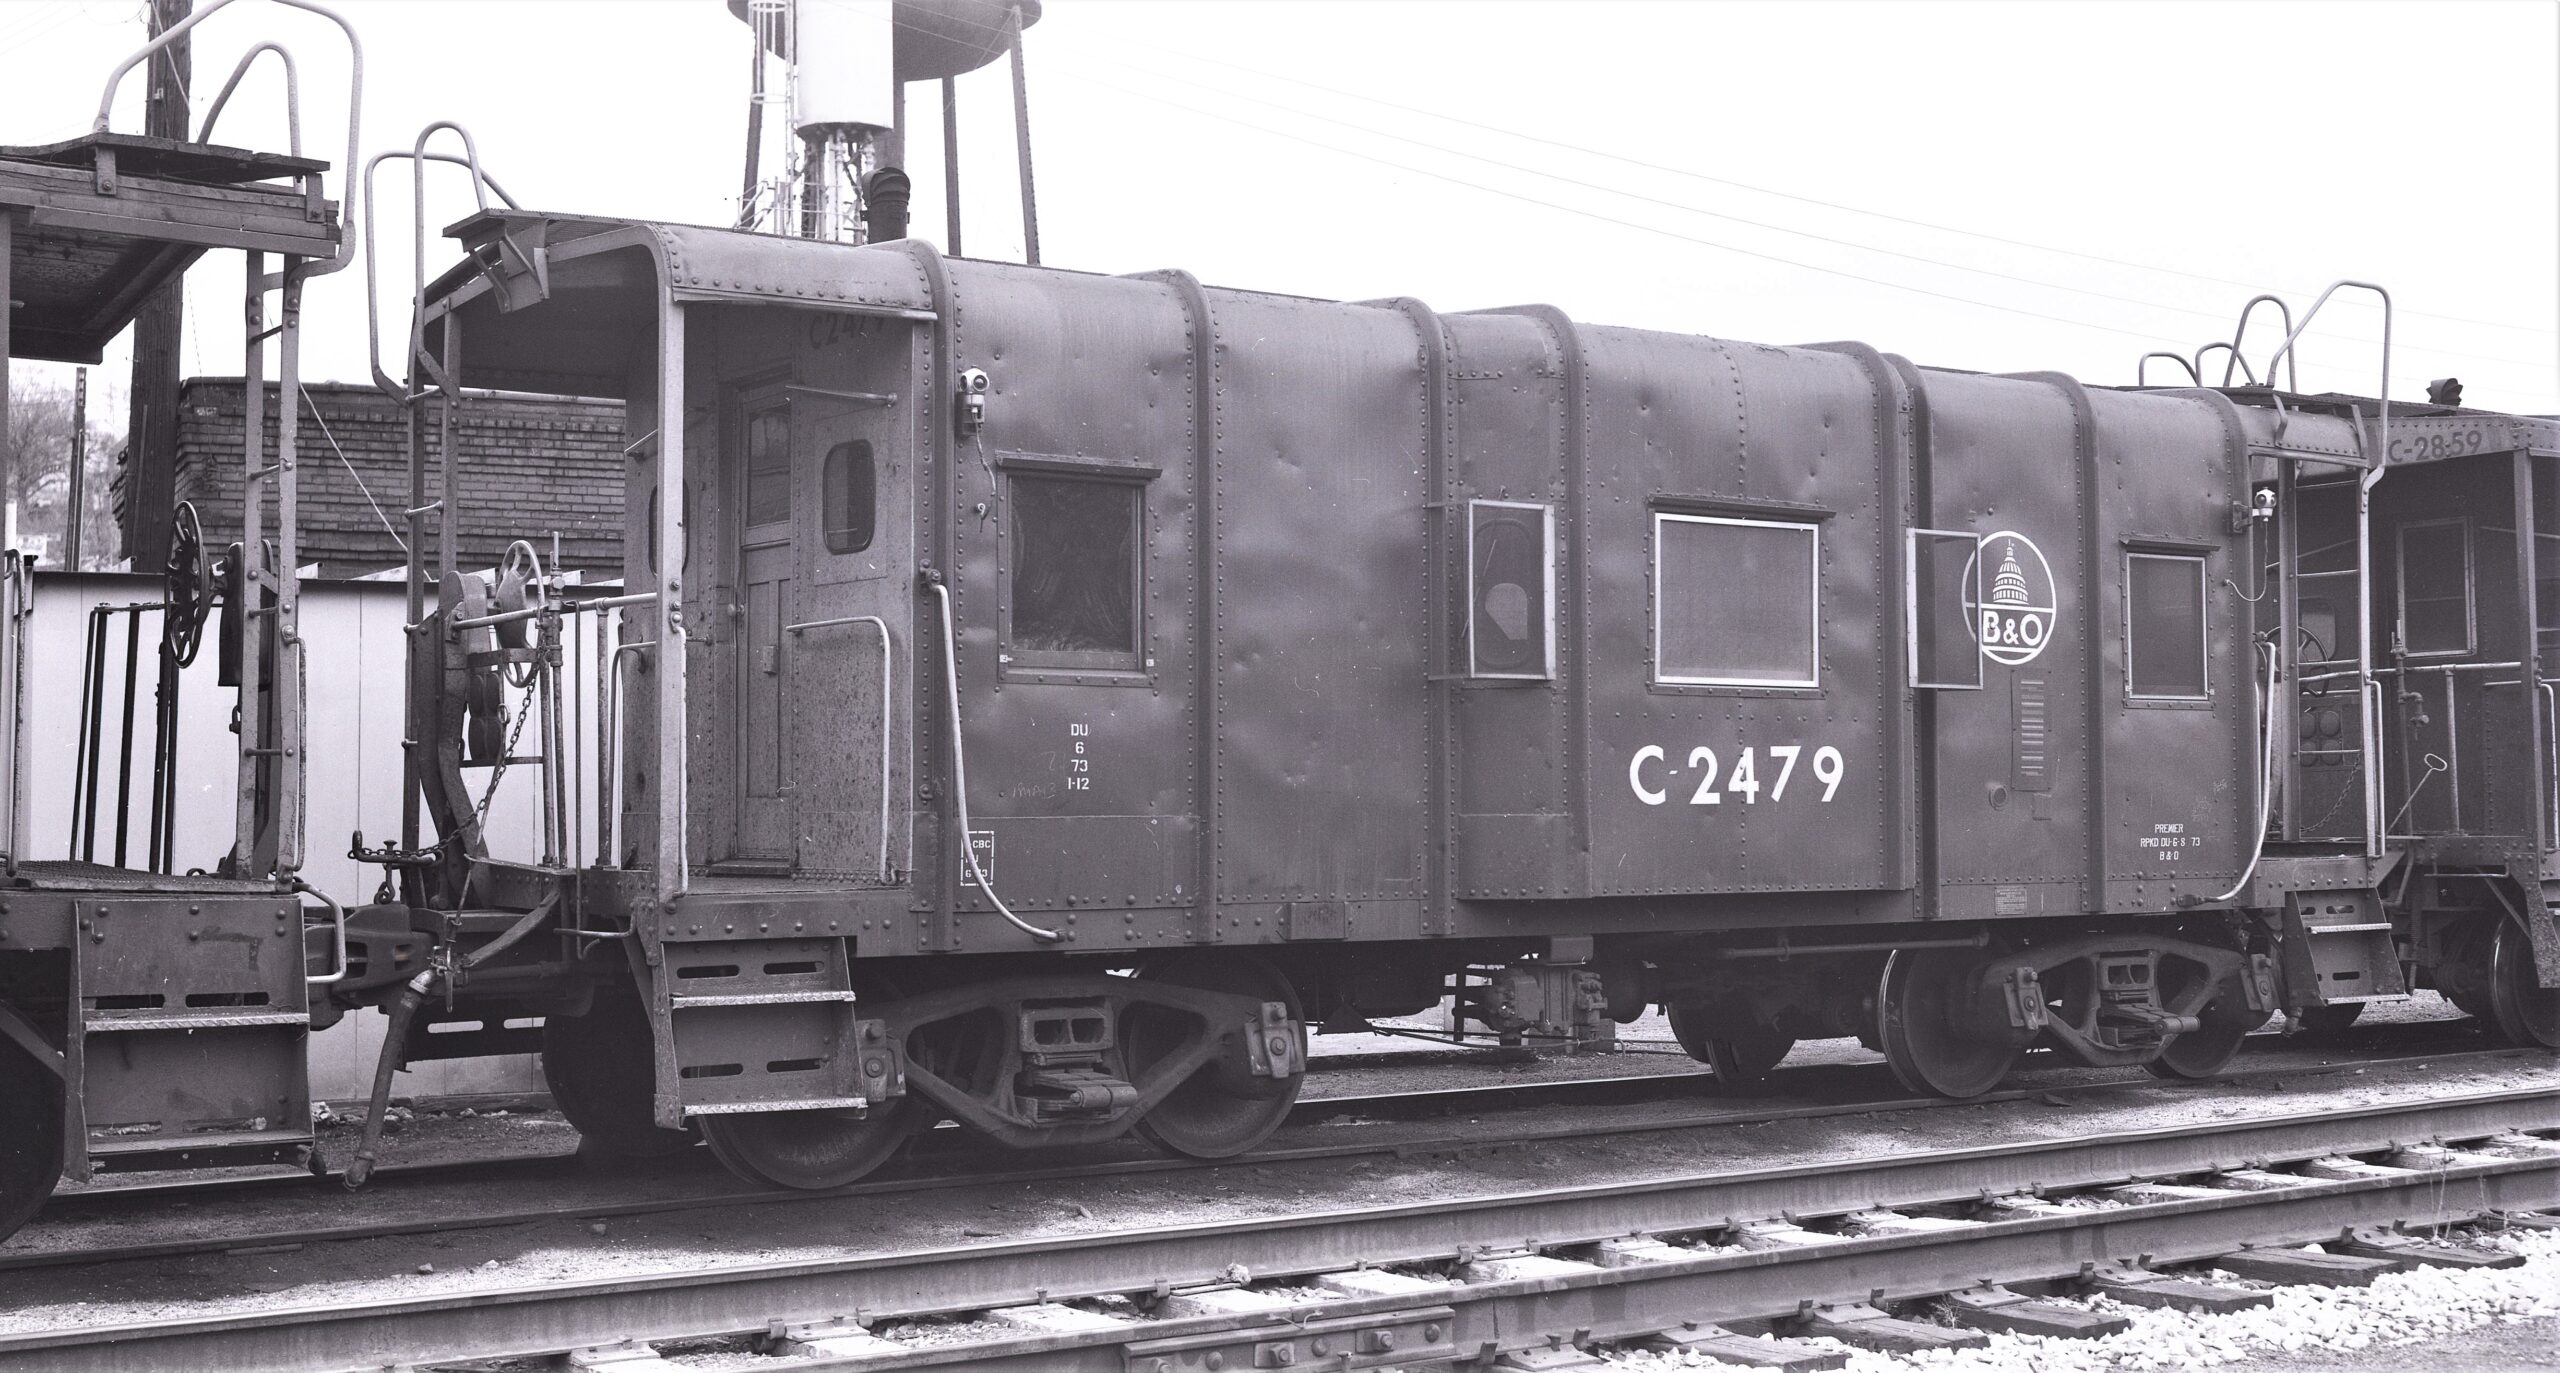 Baltimore and Ohio | Brunswick, Maryland | Class I-12 caboose C-2479 | March 11, 1974